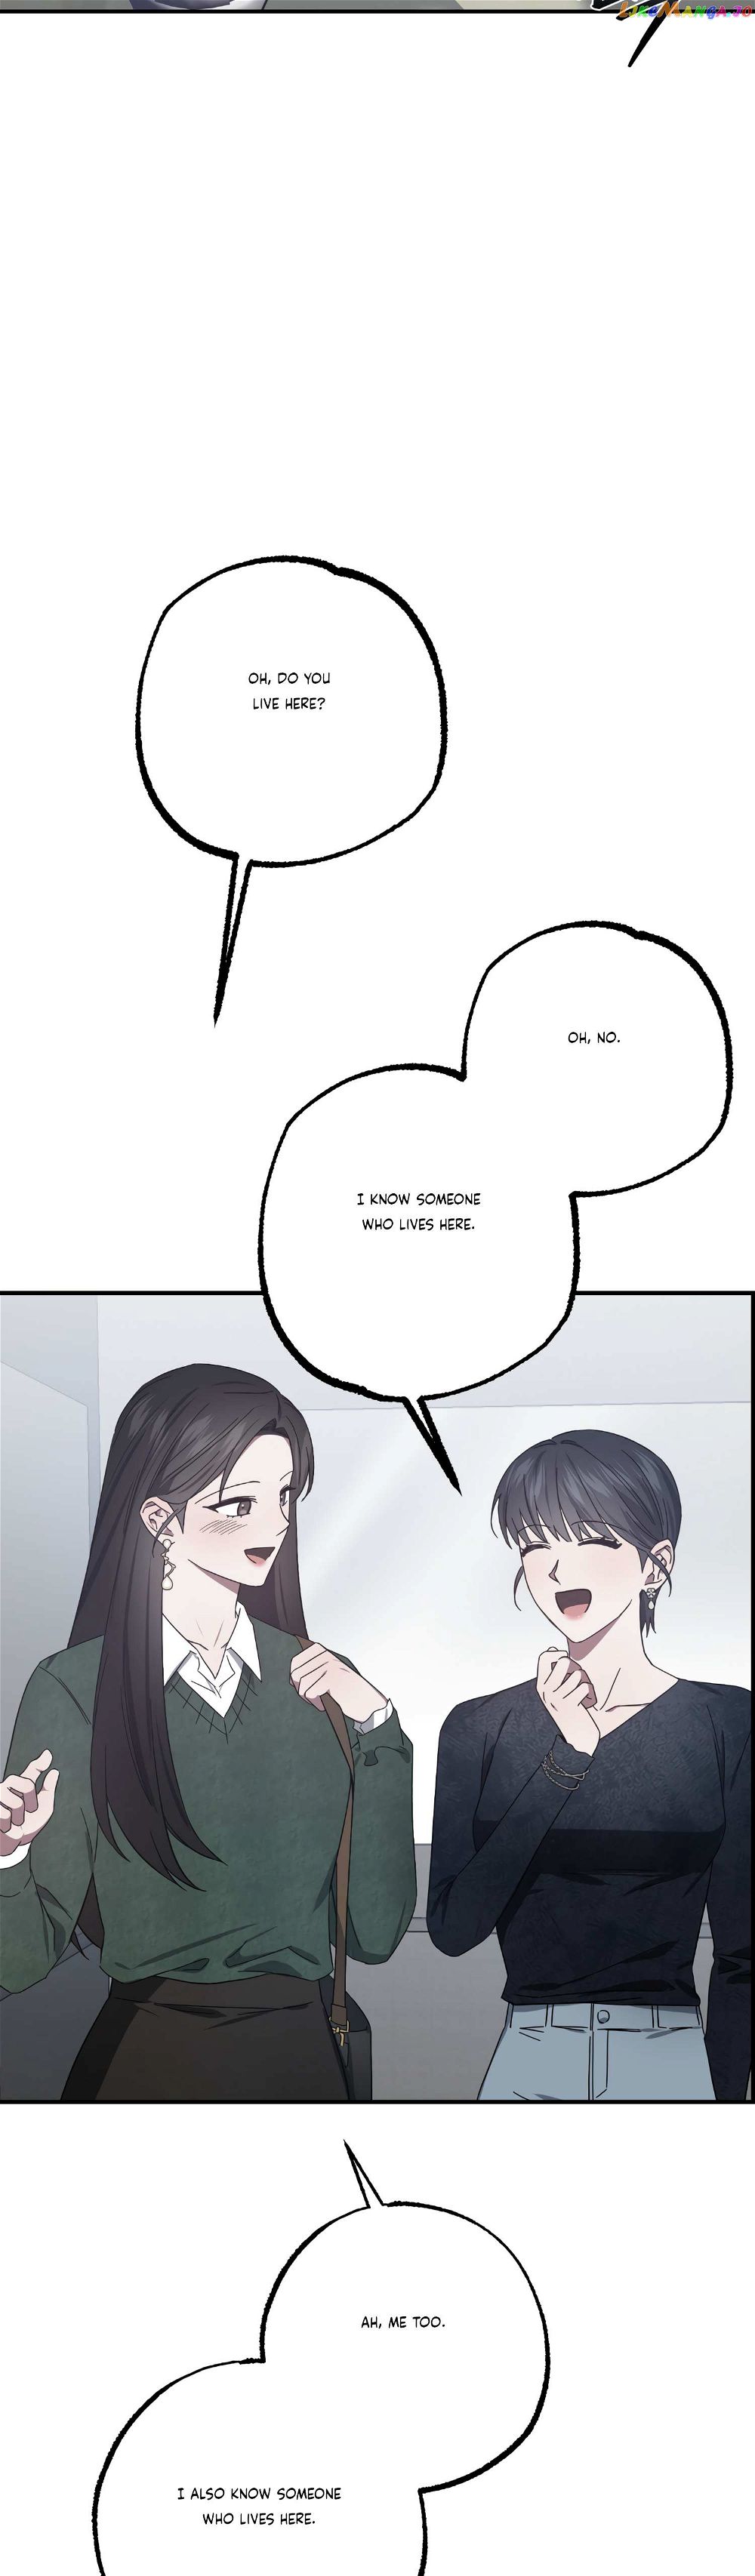 Mijeong’s Relationships chapter 32 - Page 41